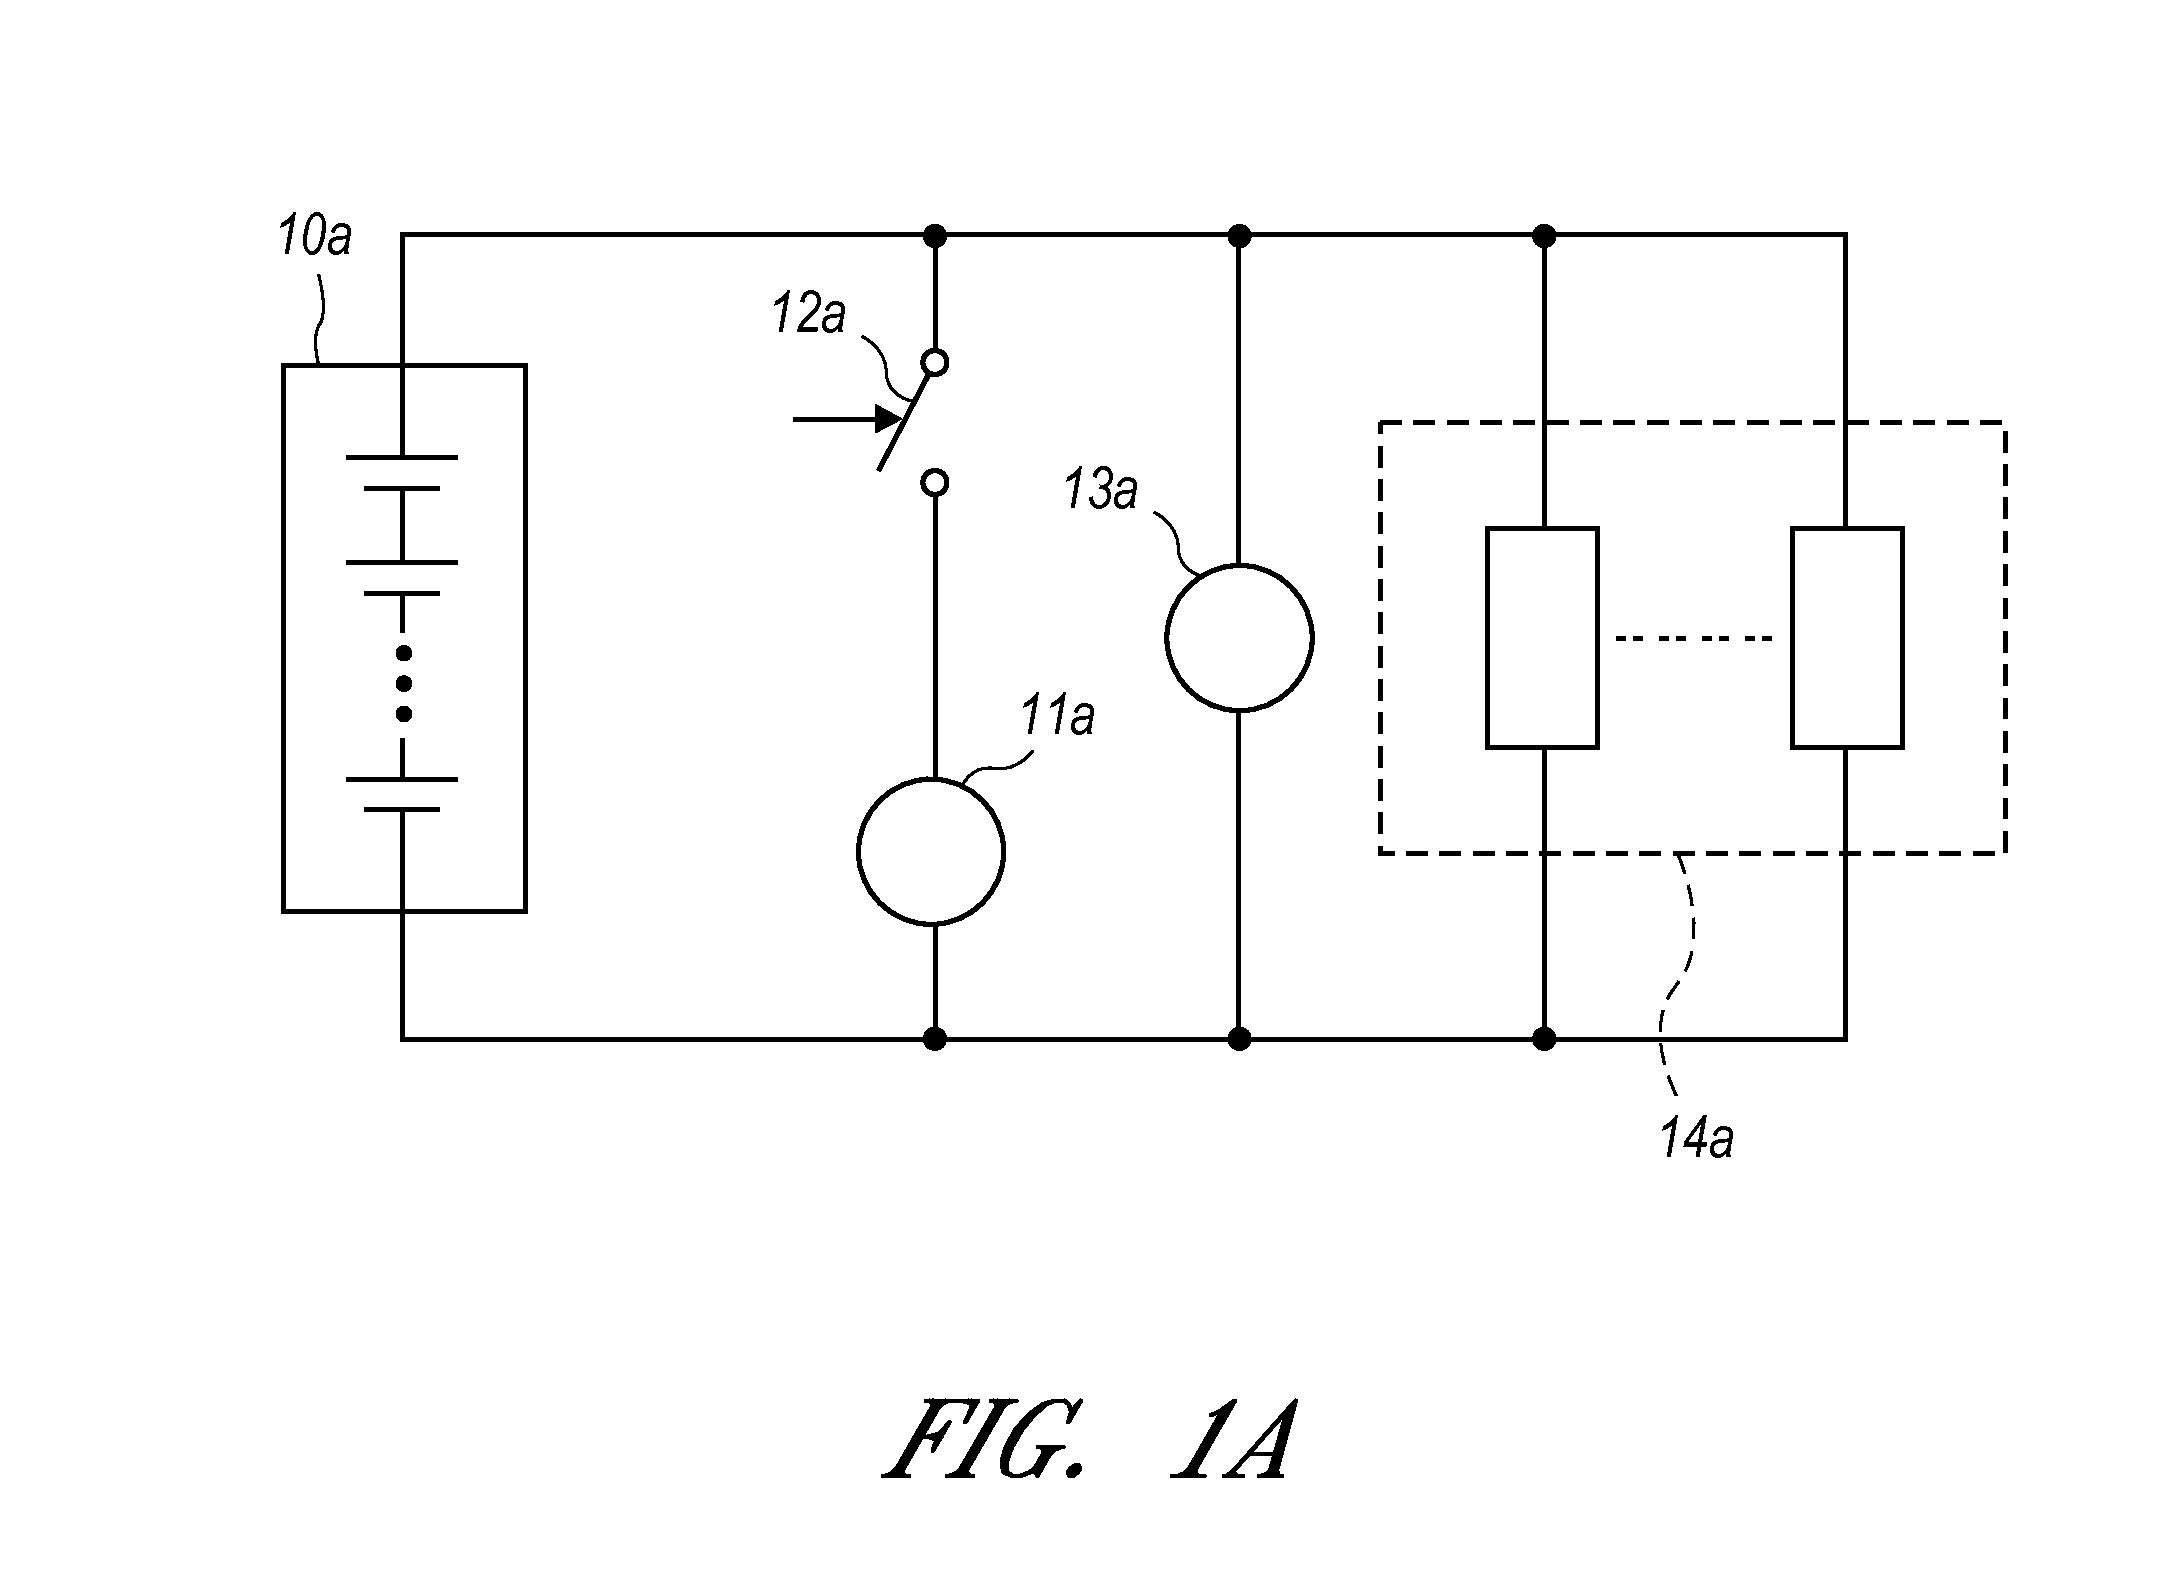 Temperature control systems with thermoelectric devices